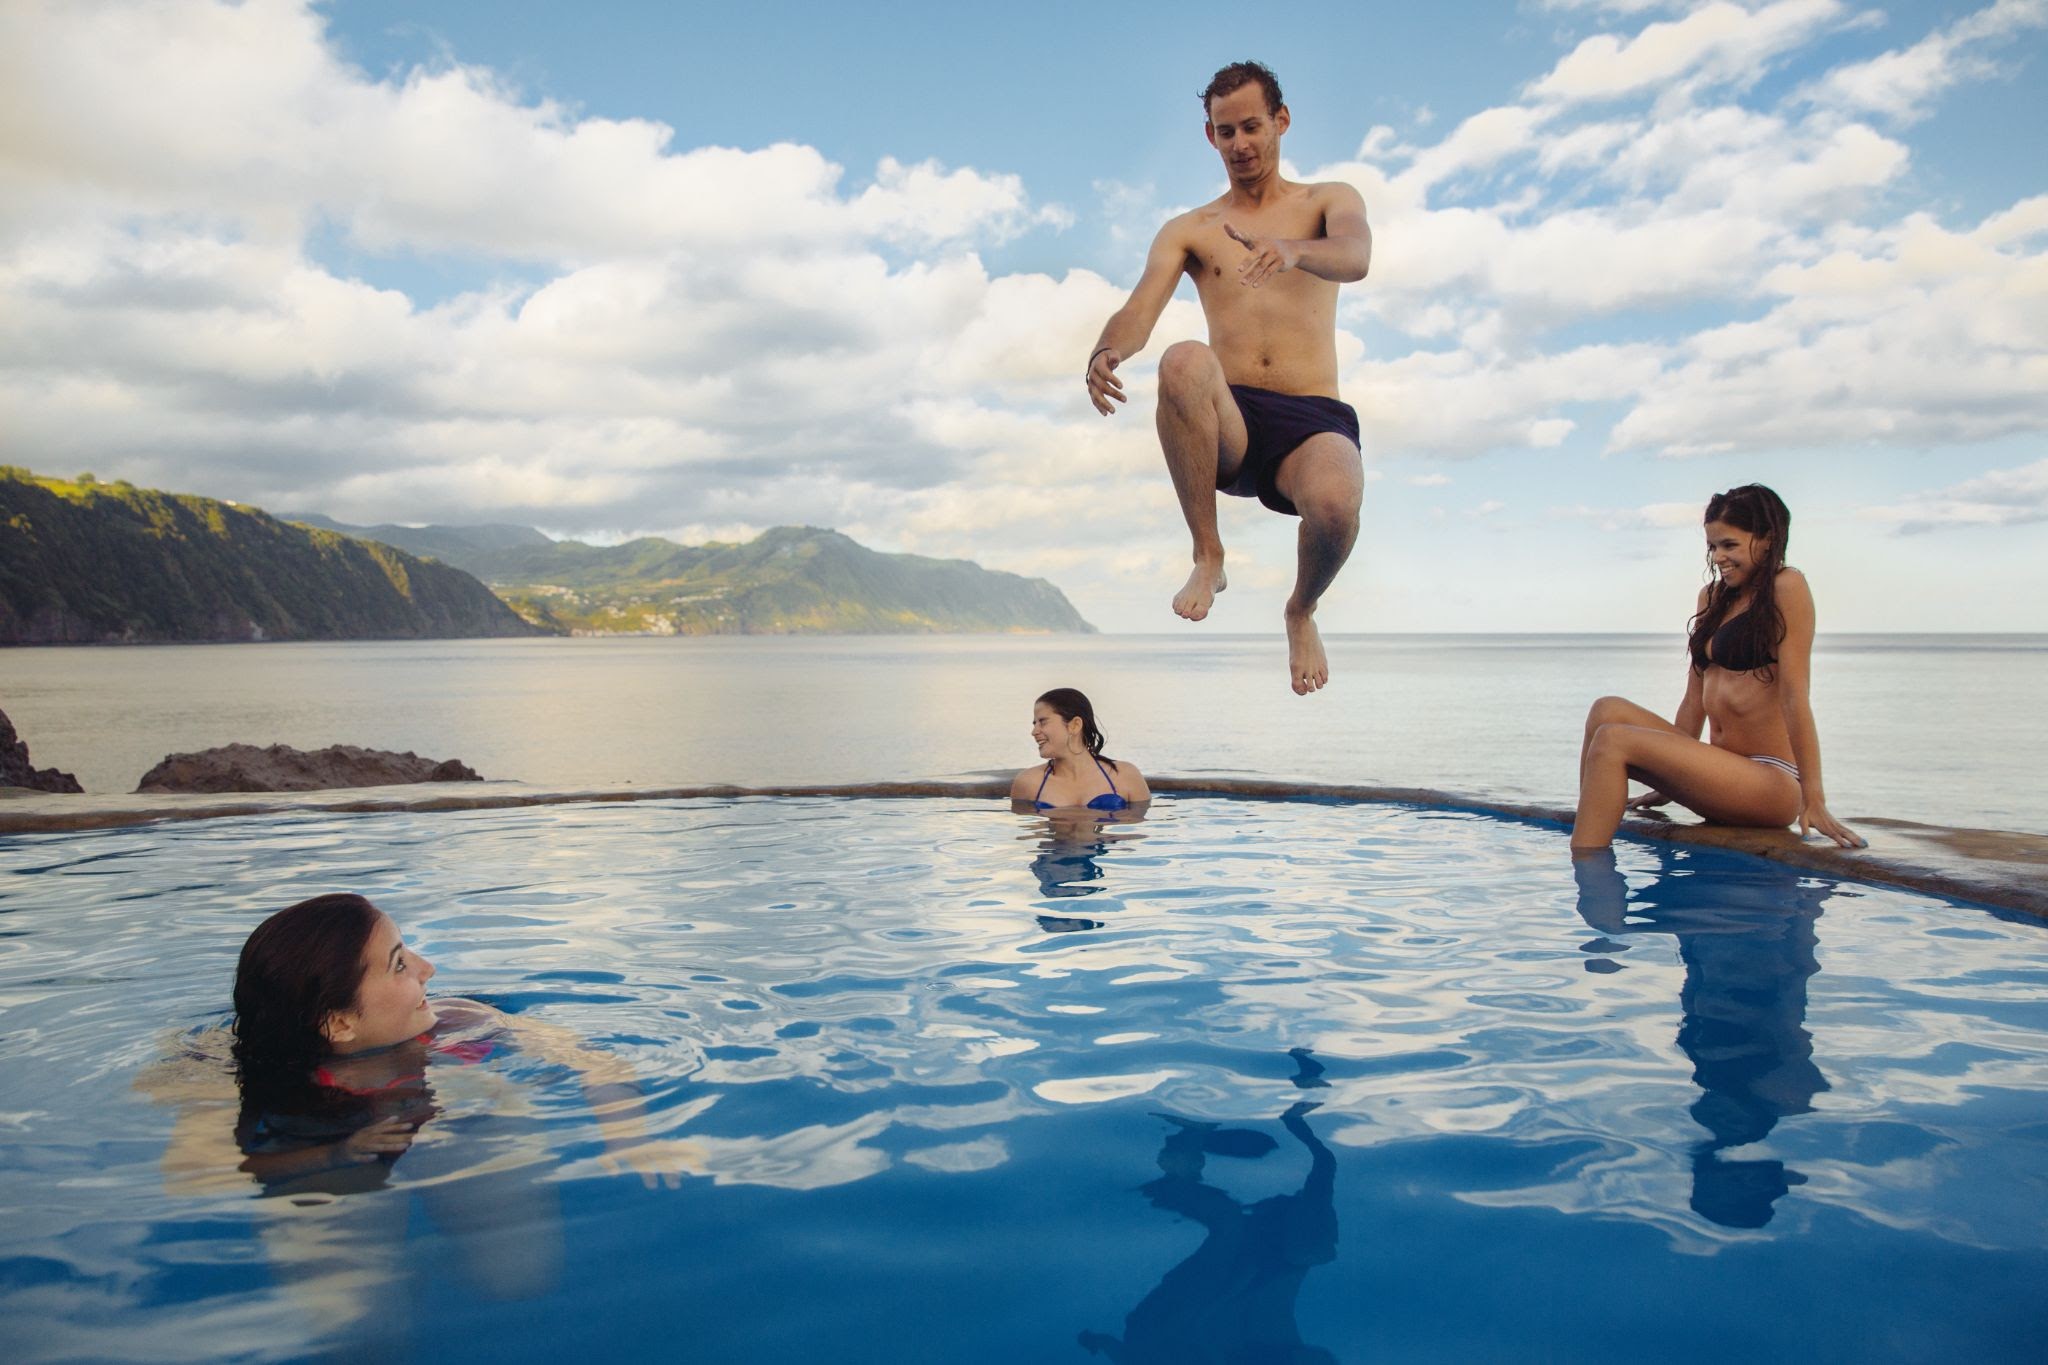 A young person jumps into an infinity pool while others watch excitedly.